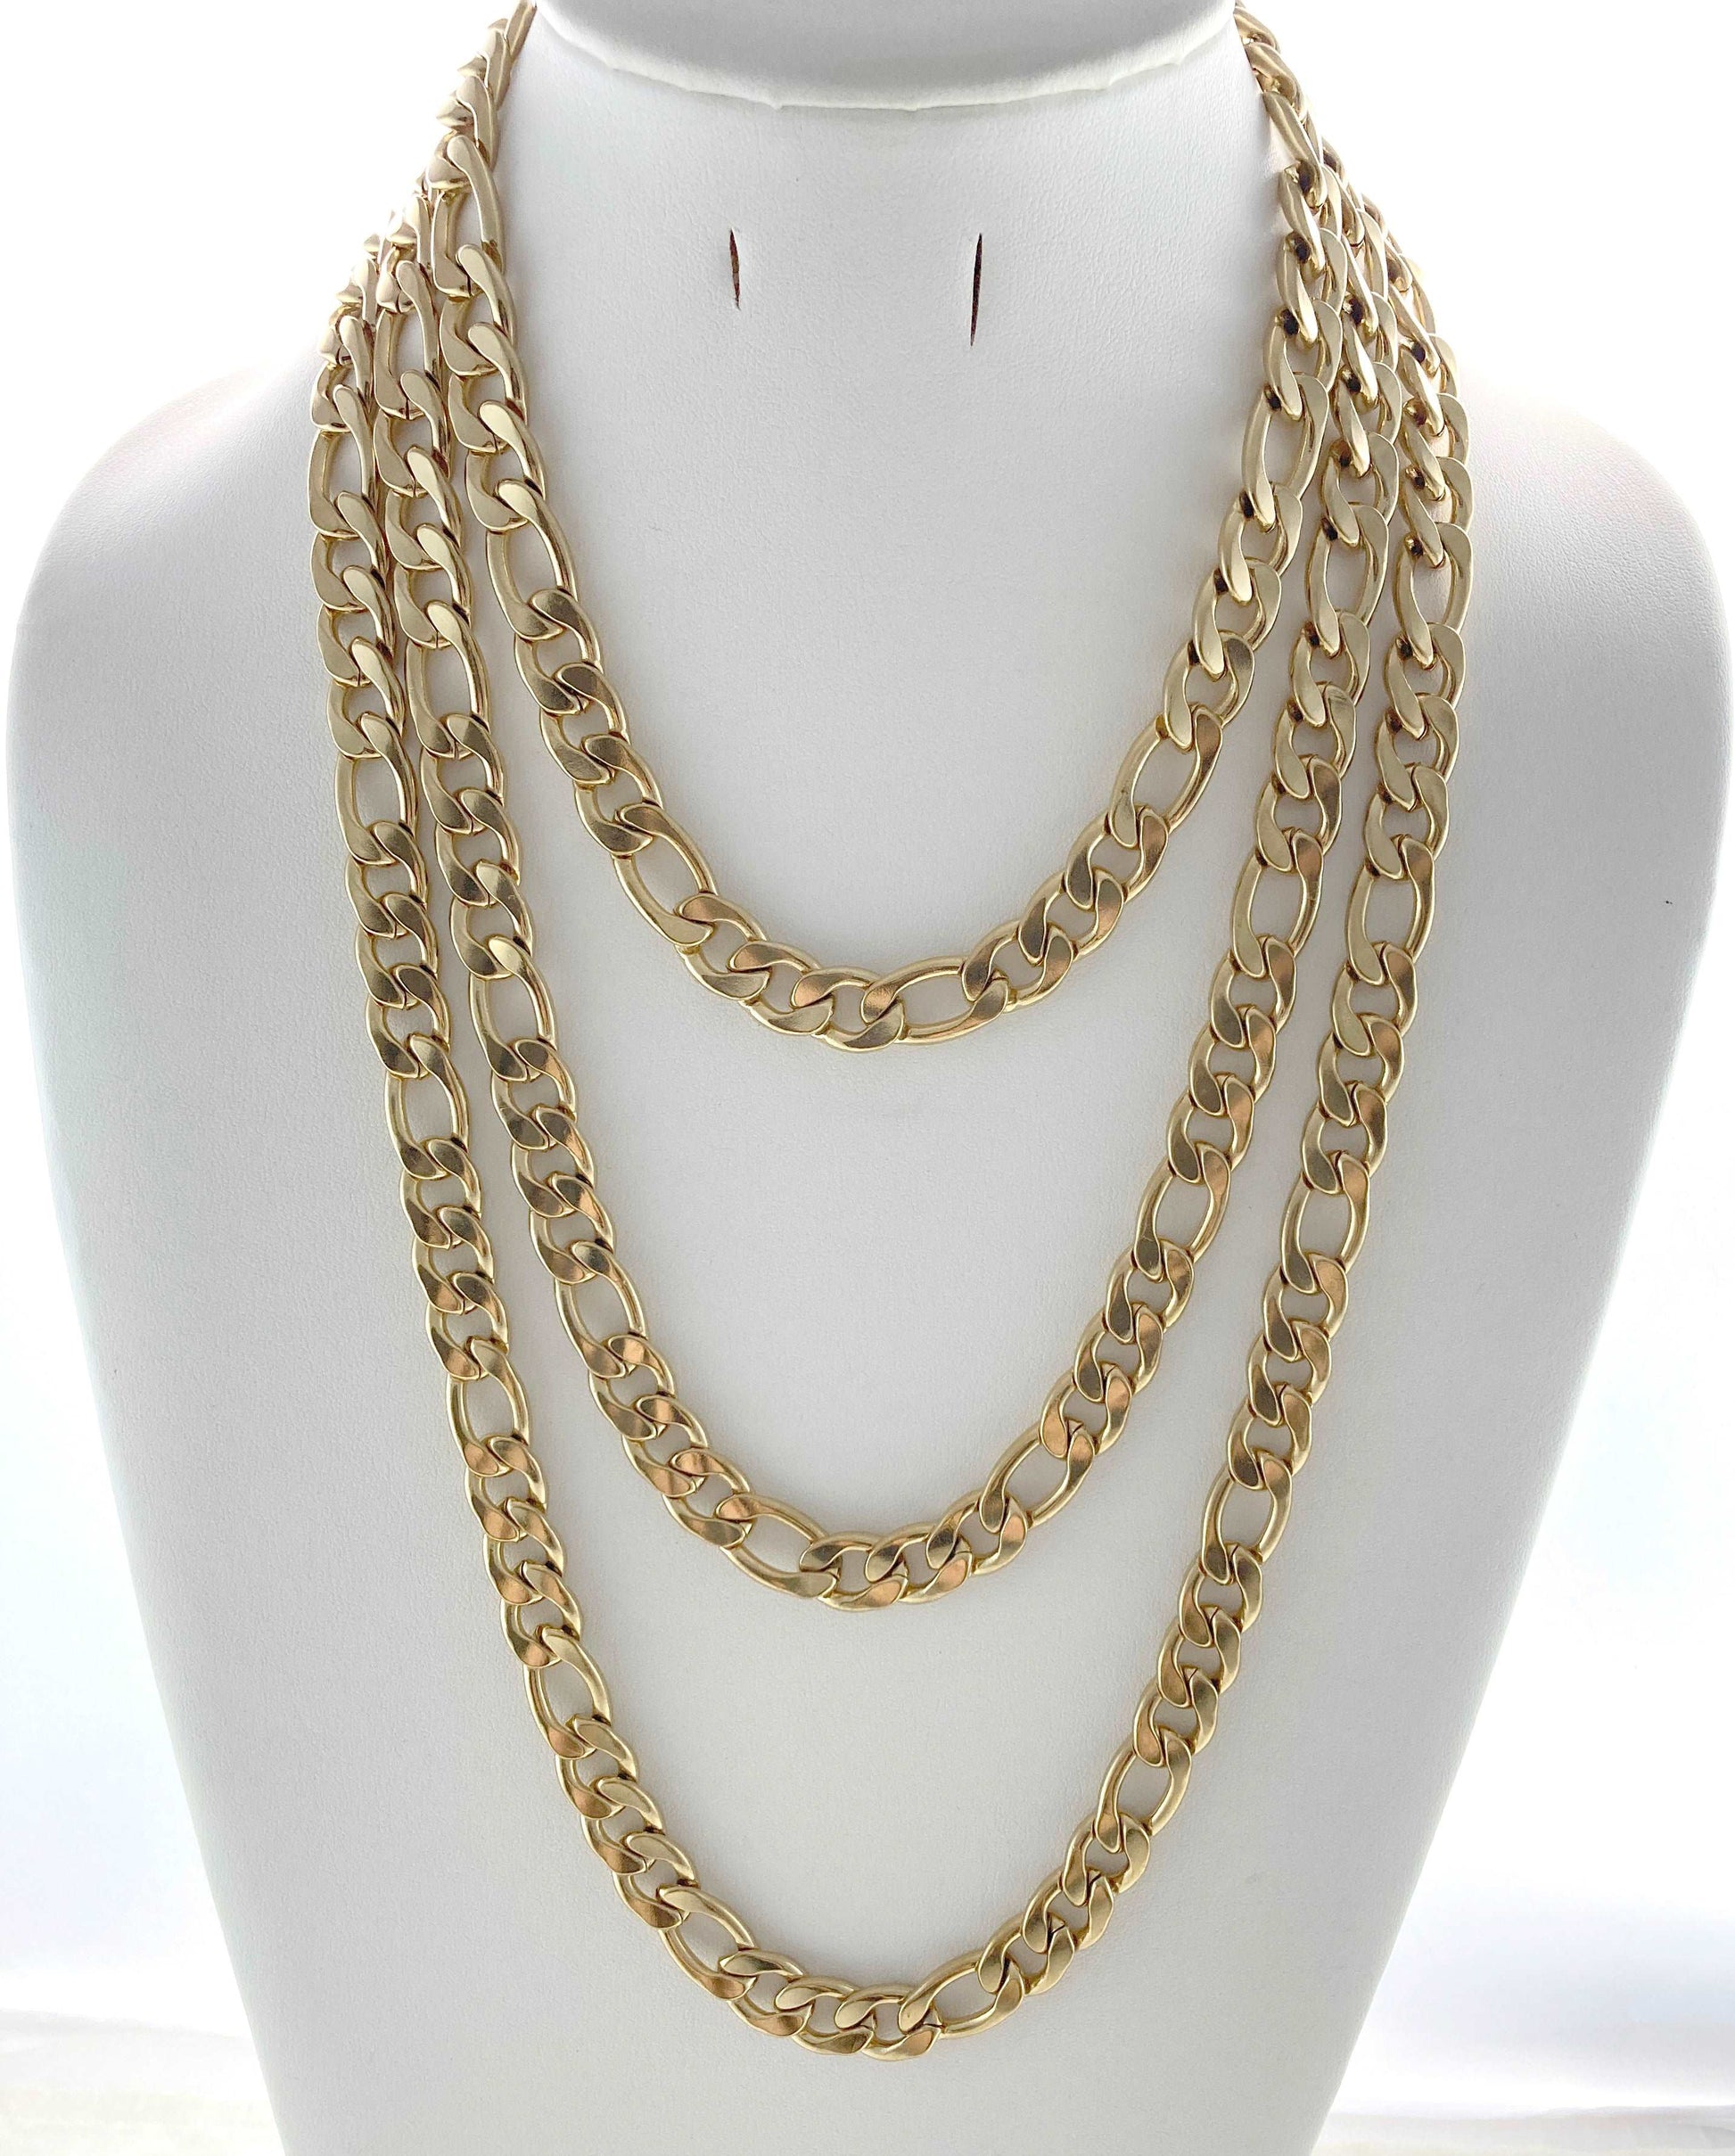 Stainless Steel wide width Neck Chain Unisex in Gold and Silver Finishes - Providence silver gold jewelry usa